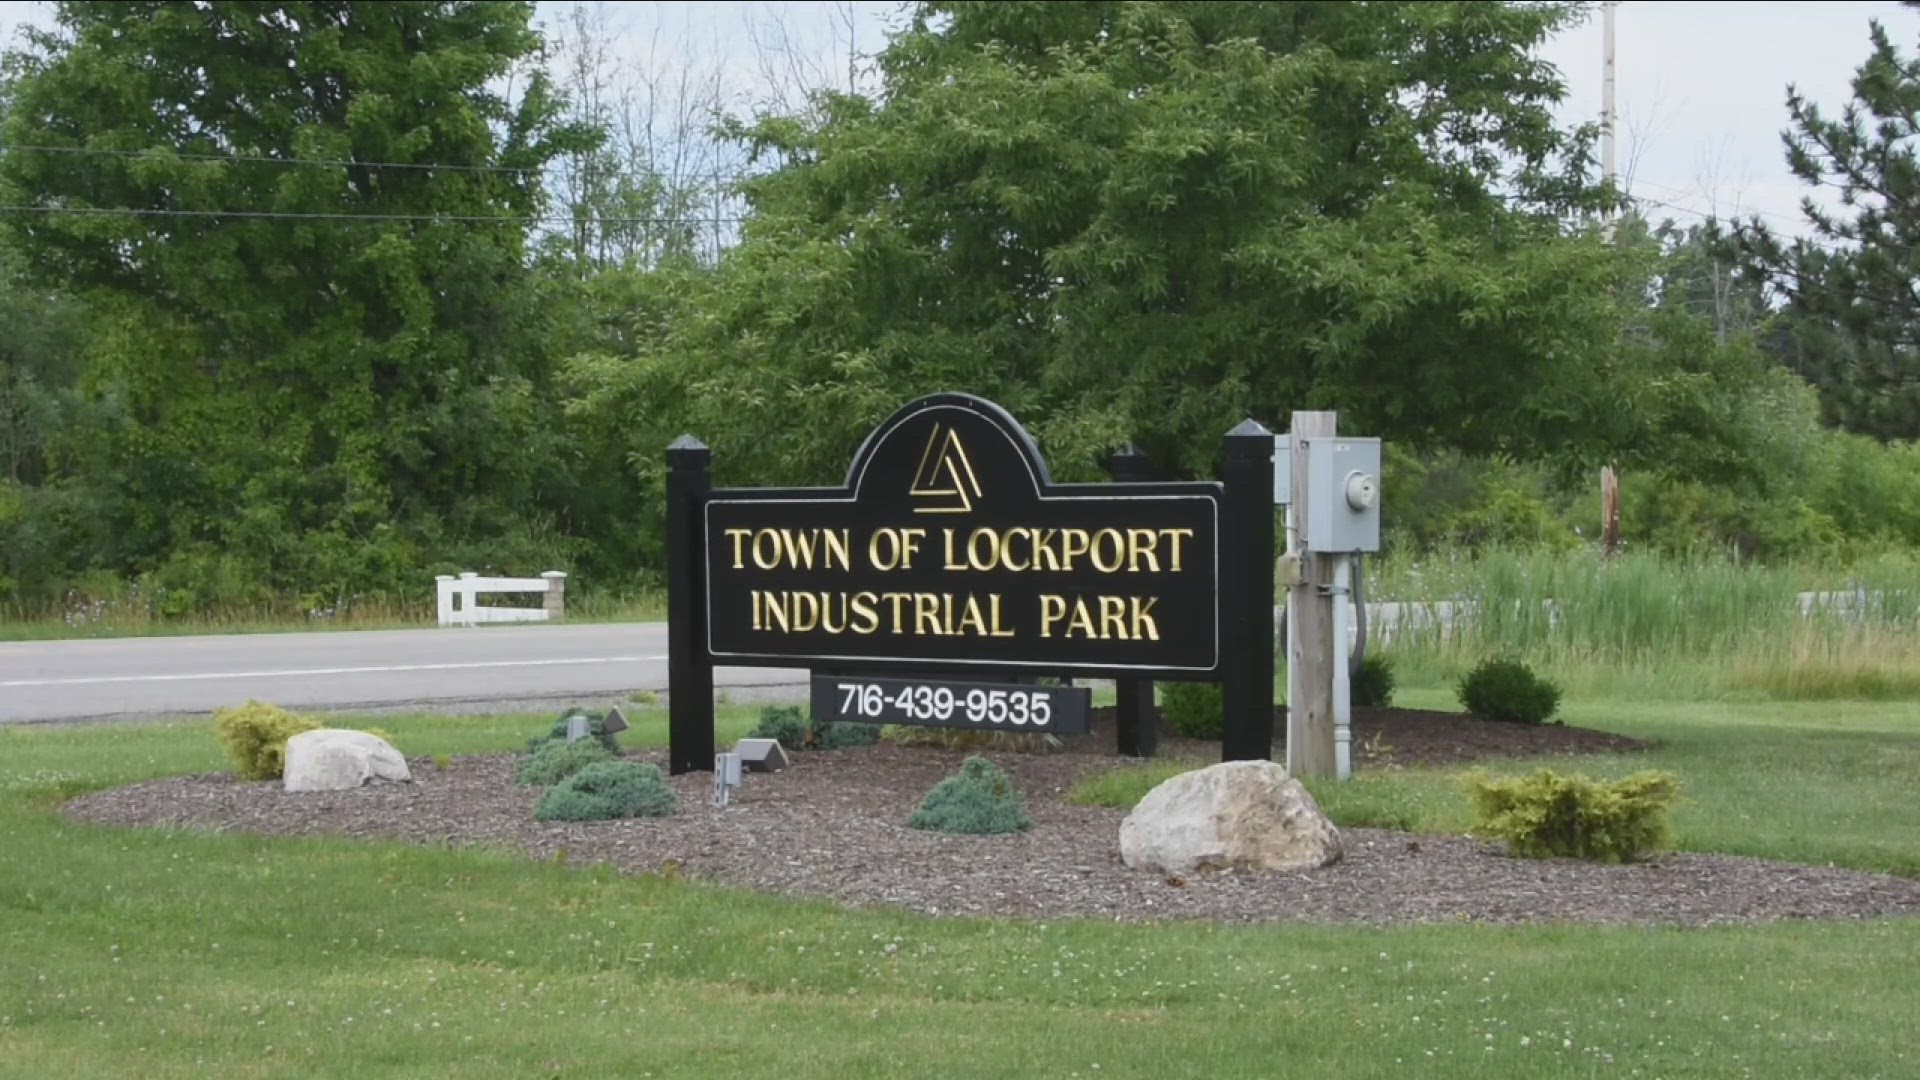 A plastics manufacturer gave Lockport IDA board members a summary of a study that touted the safety of one of its products. No such study existed.